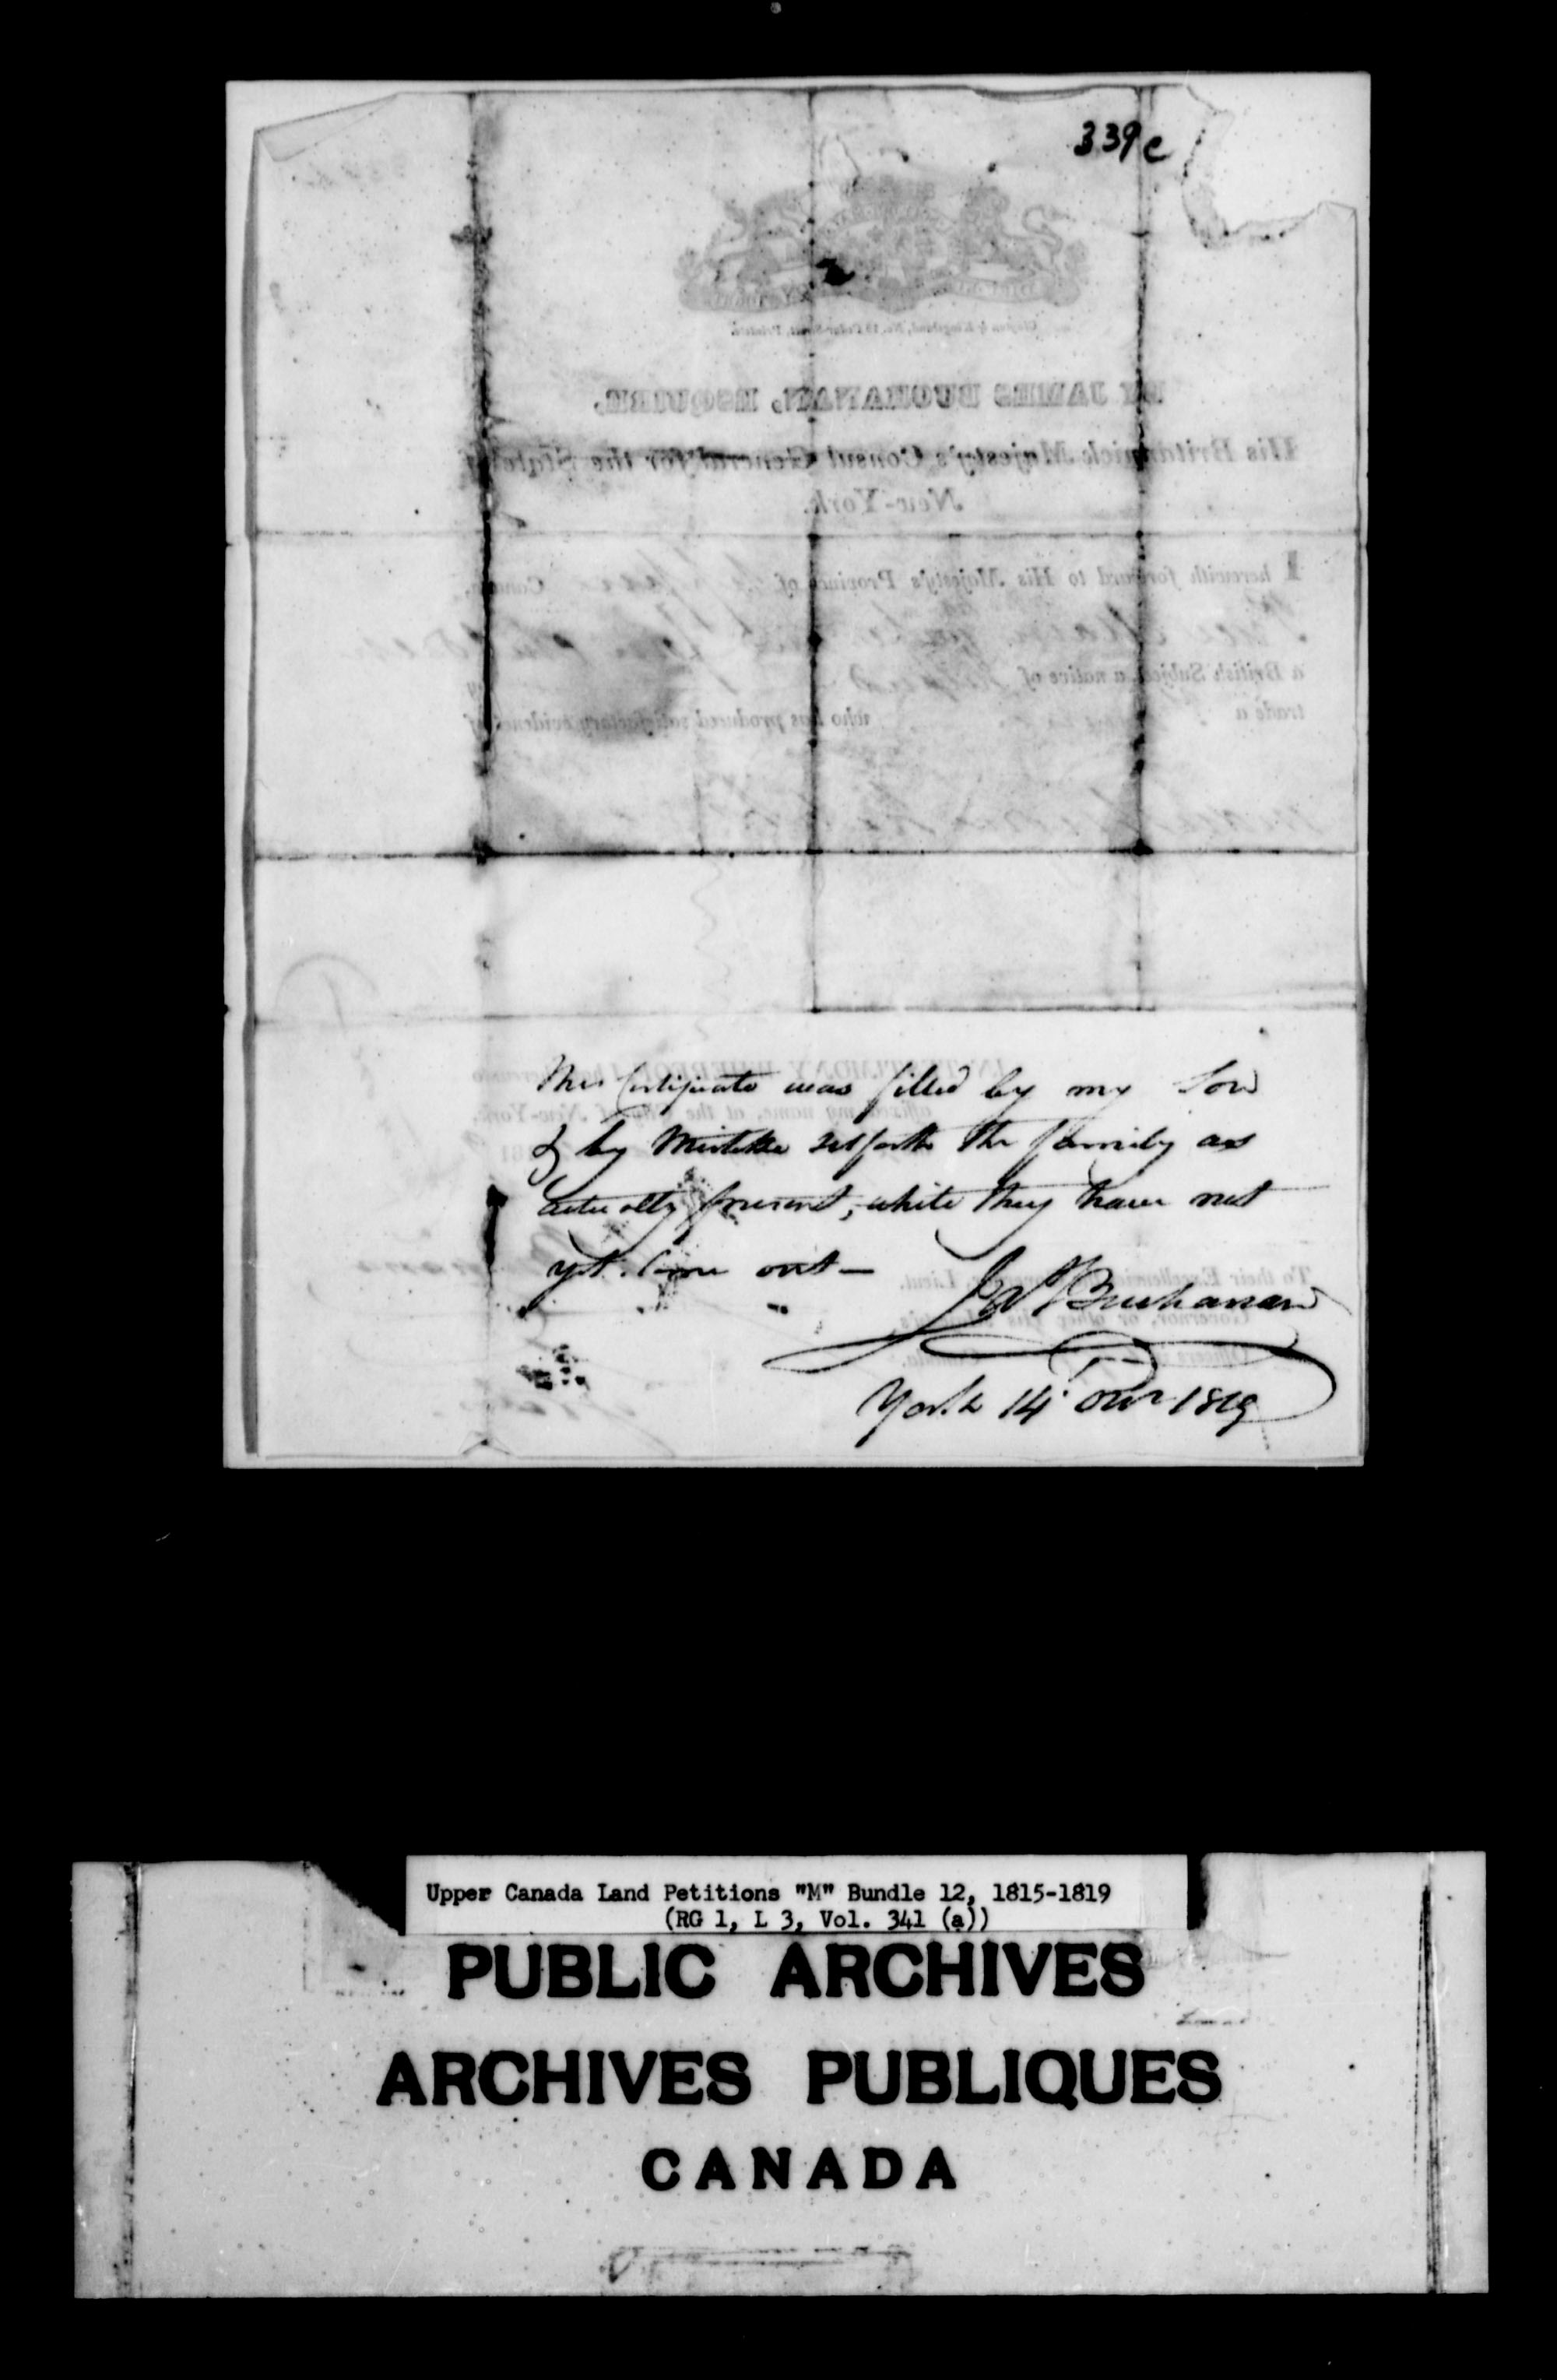 Title: Upper Canada Land Petitions (1763-1865) - Mikan Number: 205131 - Microform: c-2201